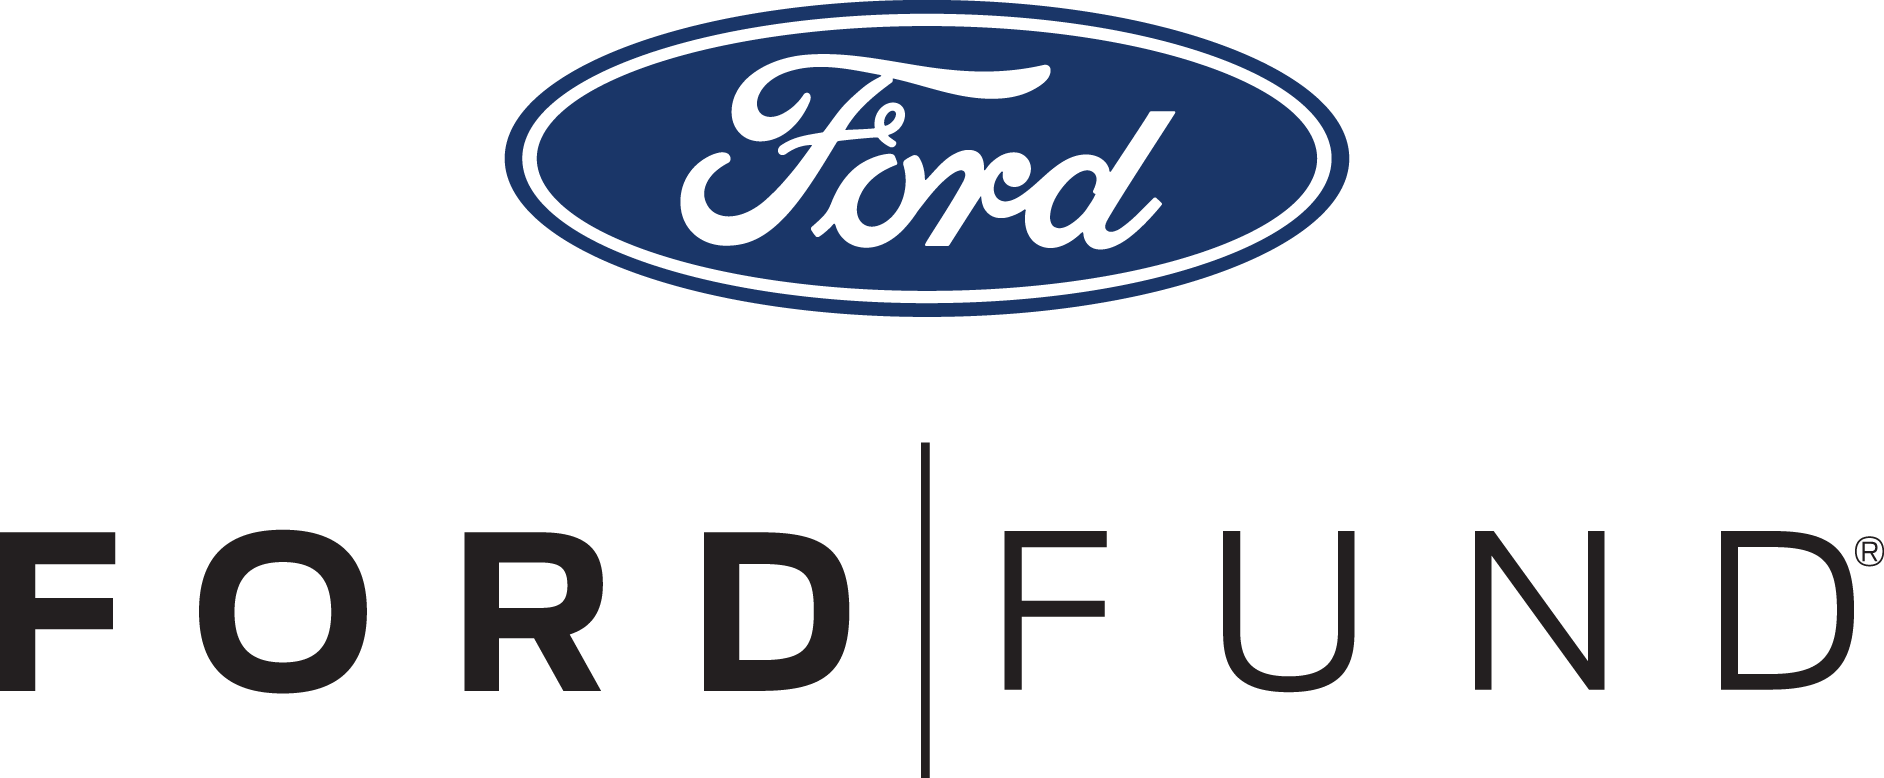 Blue Oval Brand Logo - Ford Fund. Ford Blue Oval Network